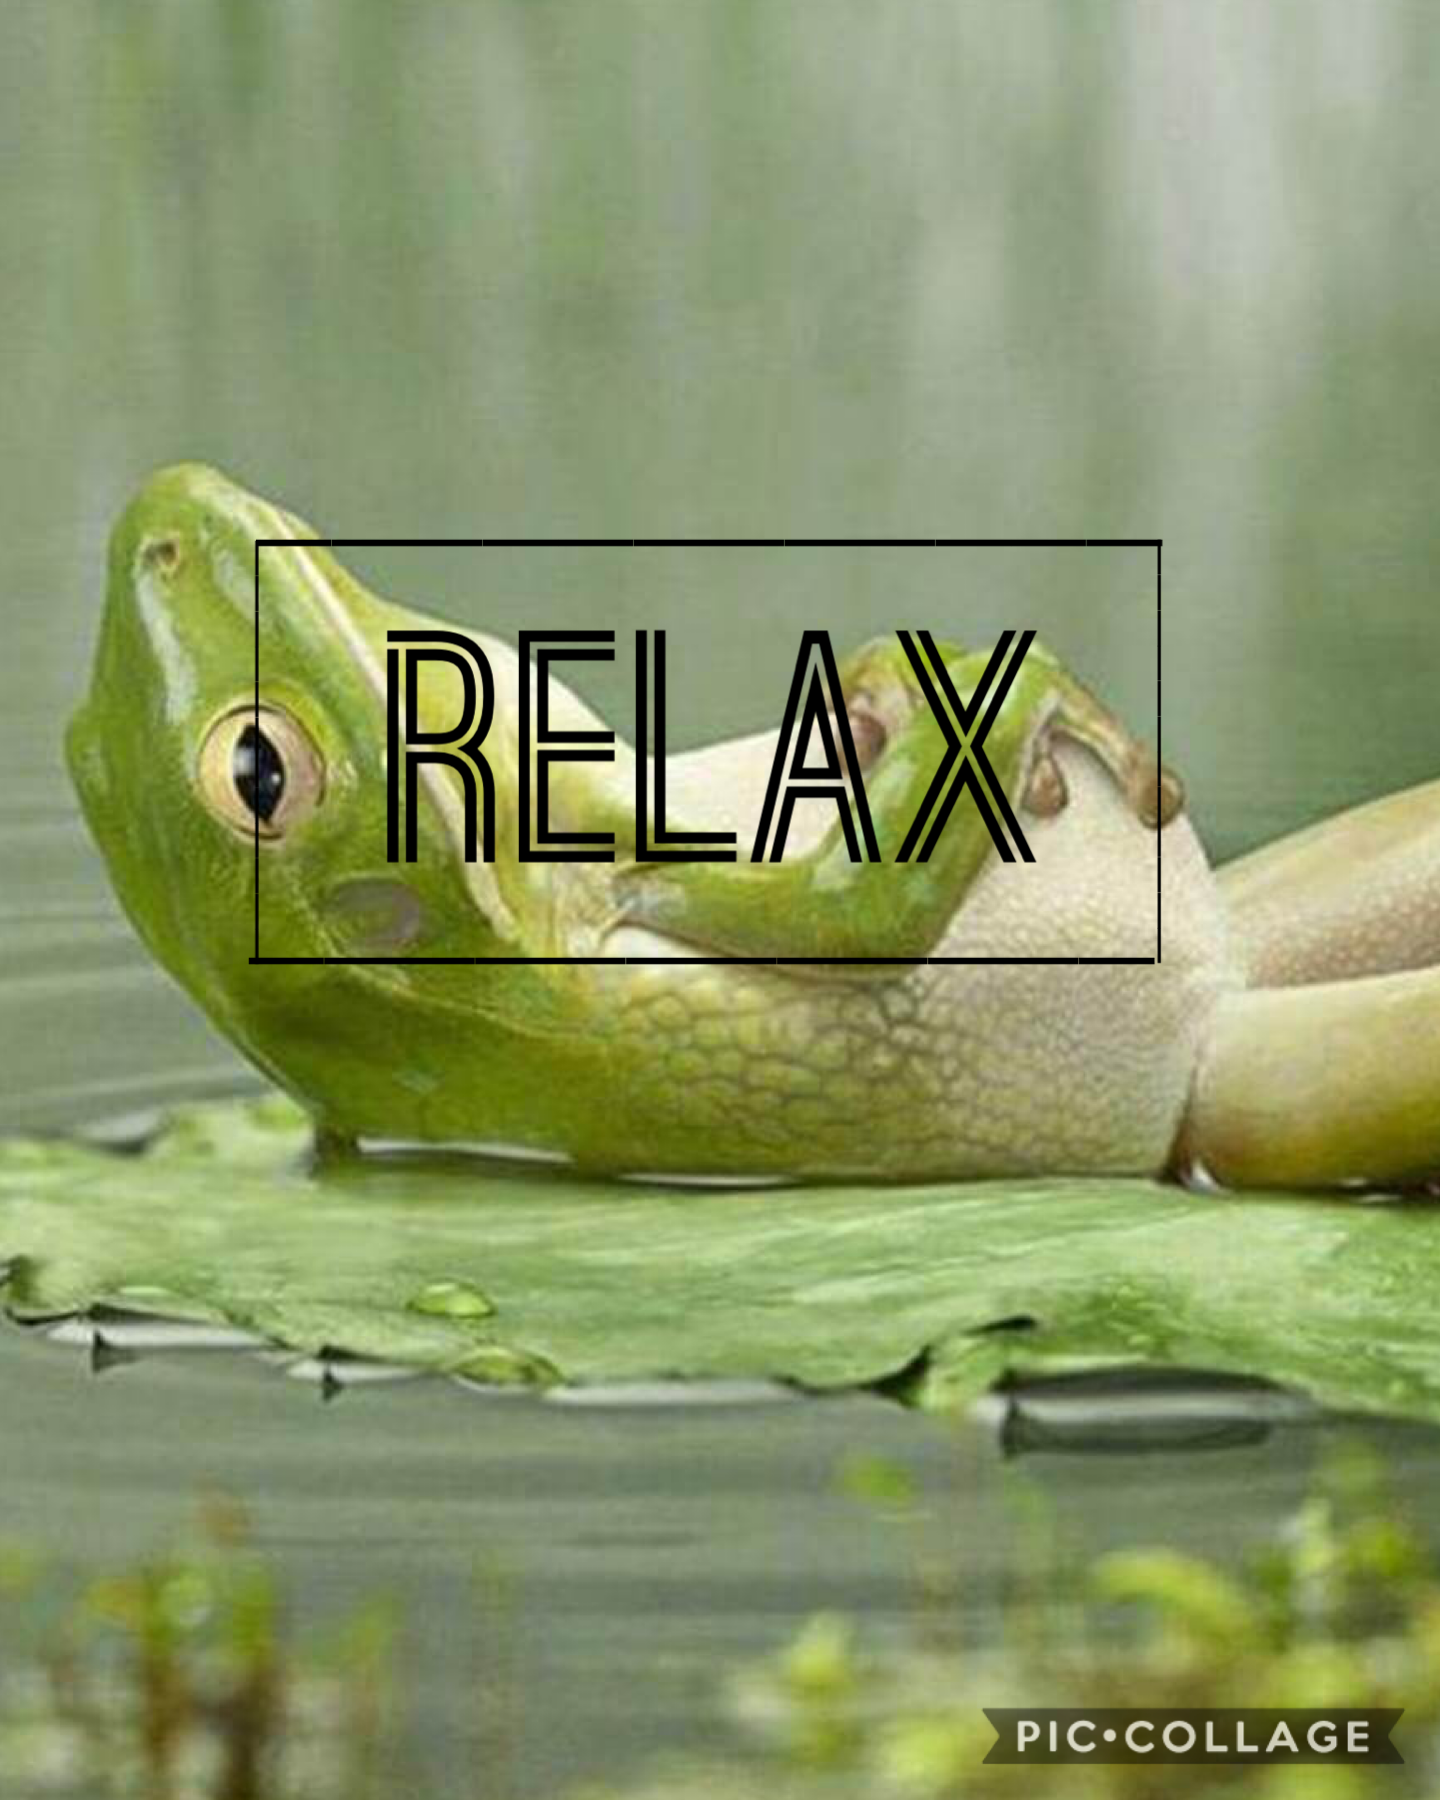 Sometimes you just need to relax ;)